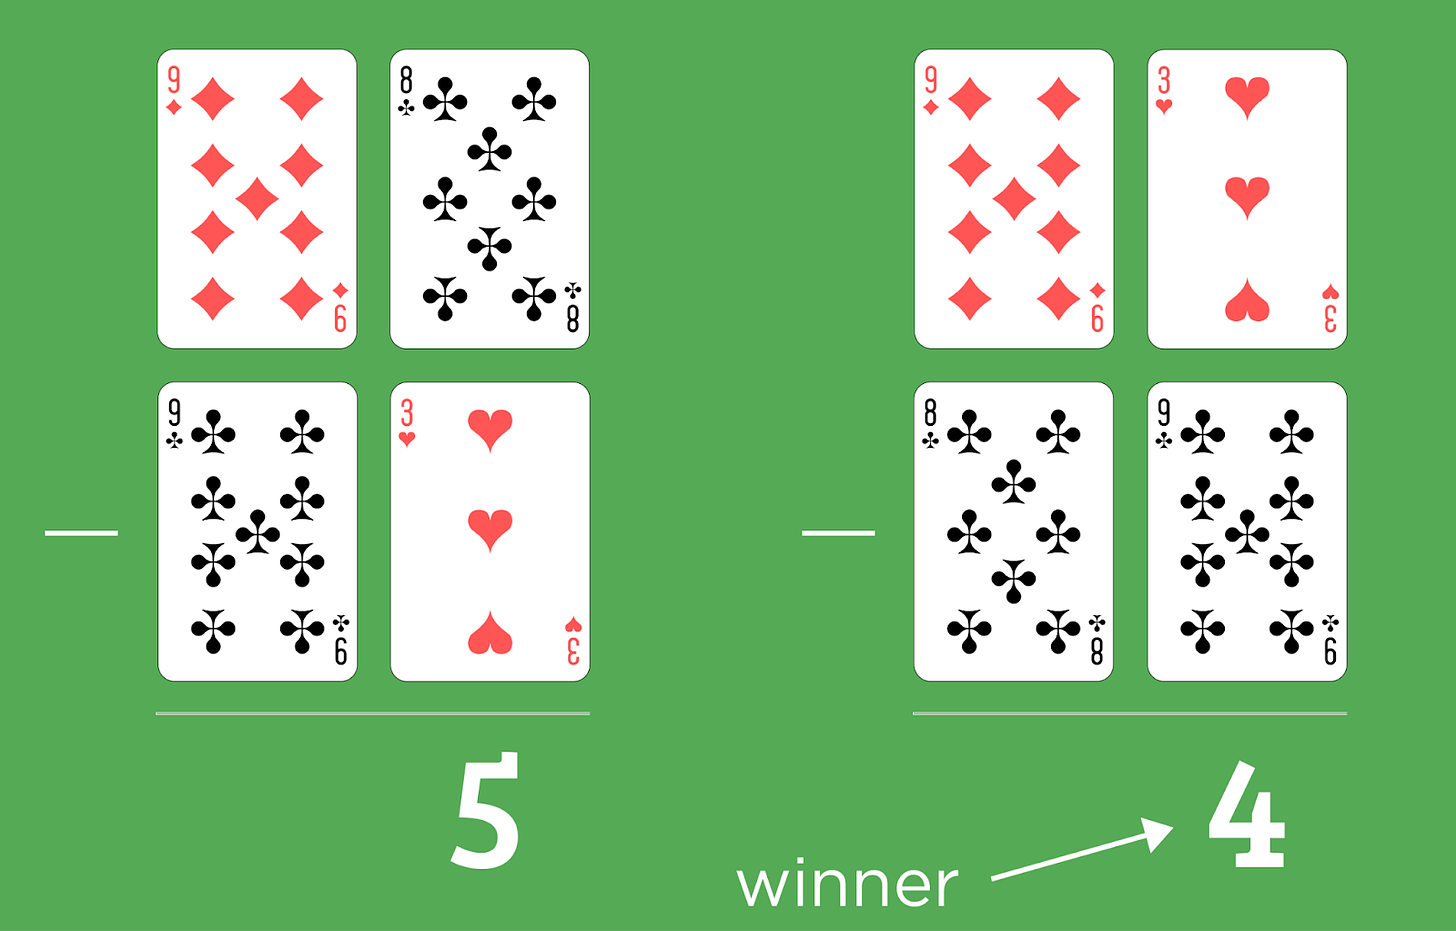 The same cards arranged to form 98-93 and 93-89.